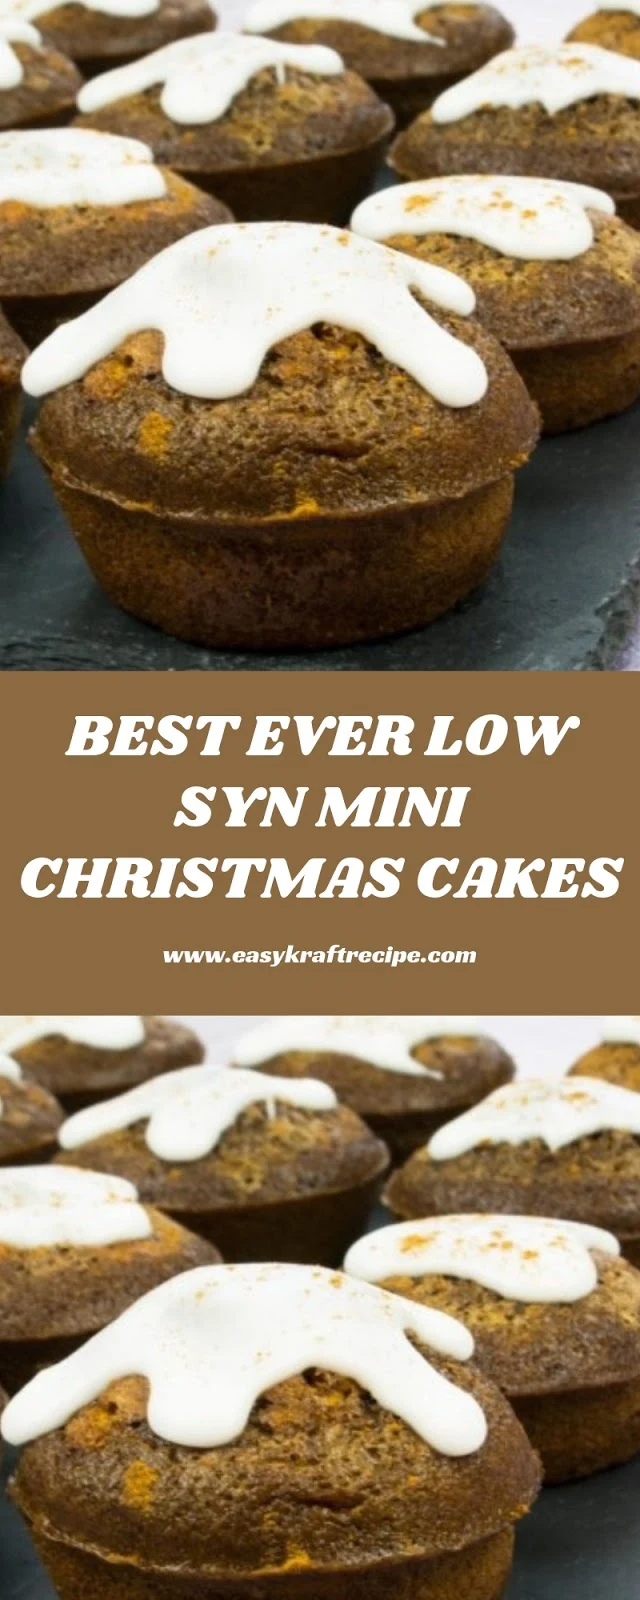 BEST EVER LOW SYN MINI CHRISTMAS CAKES